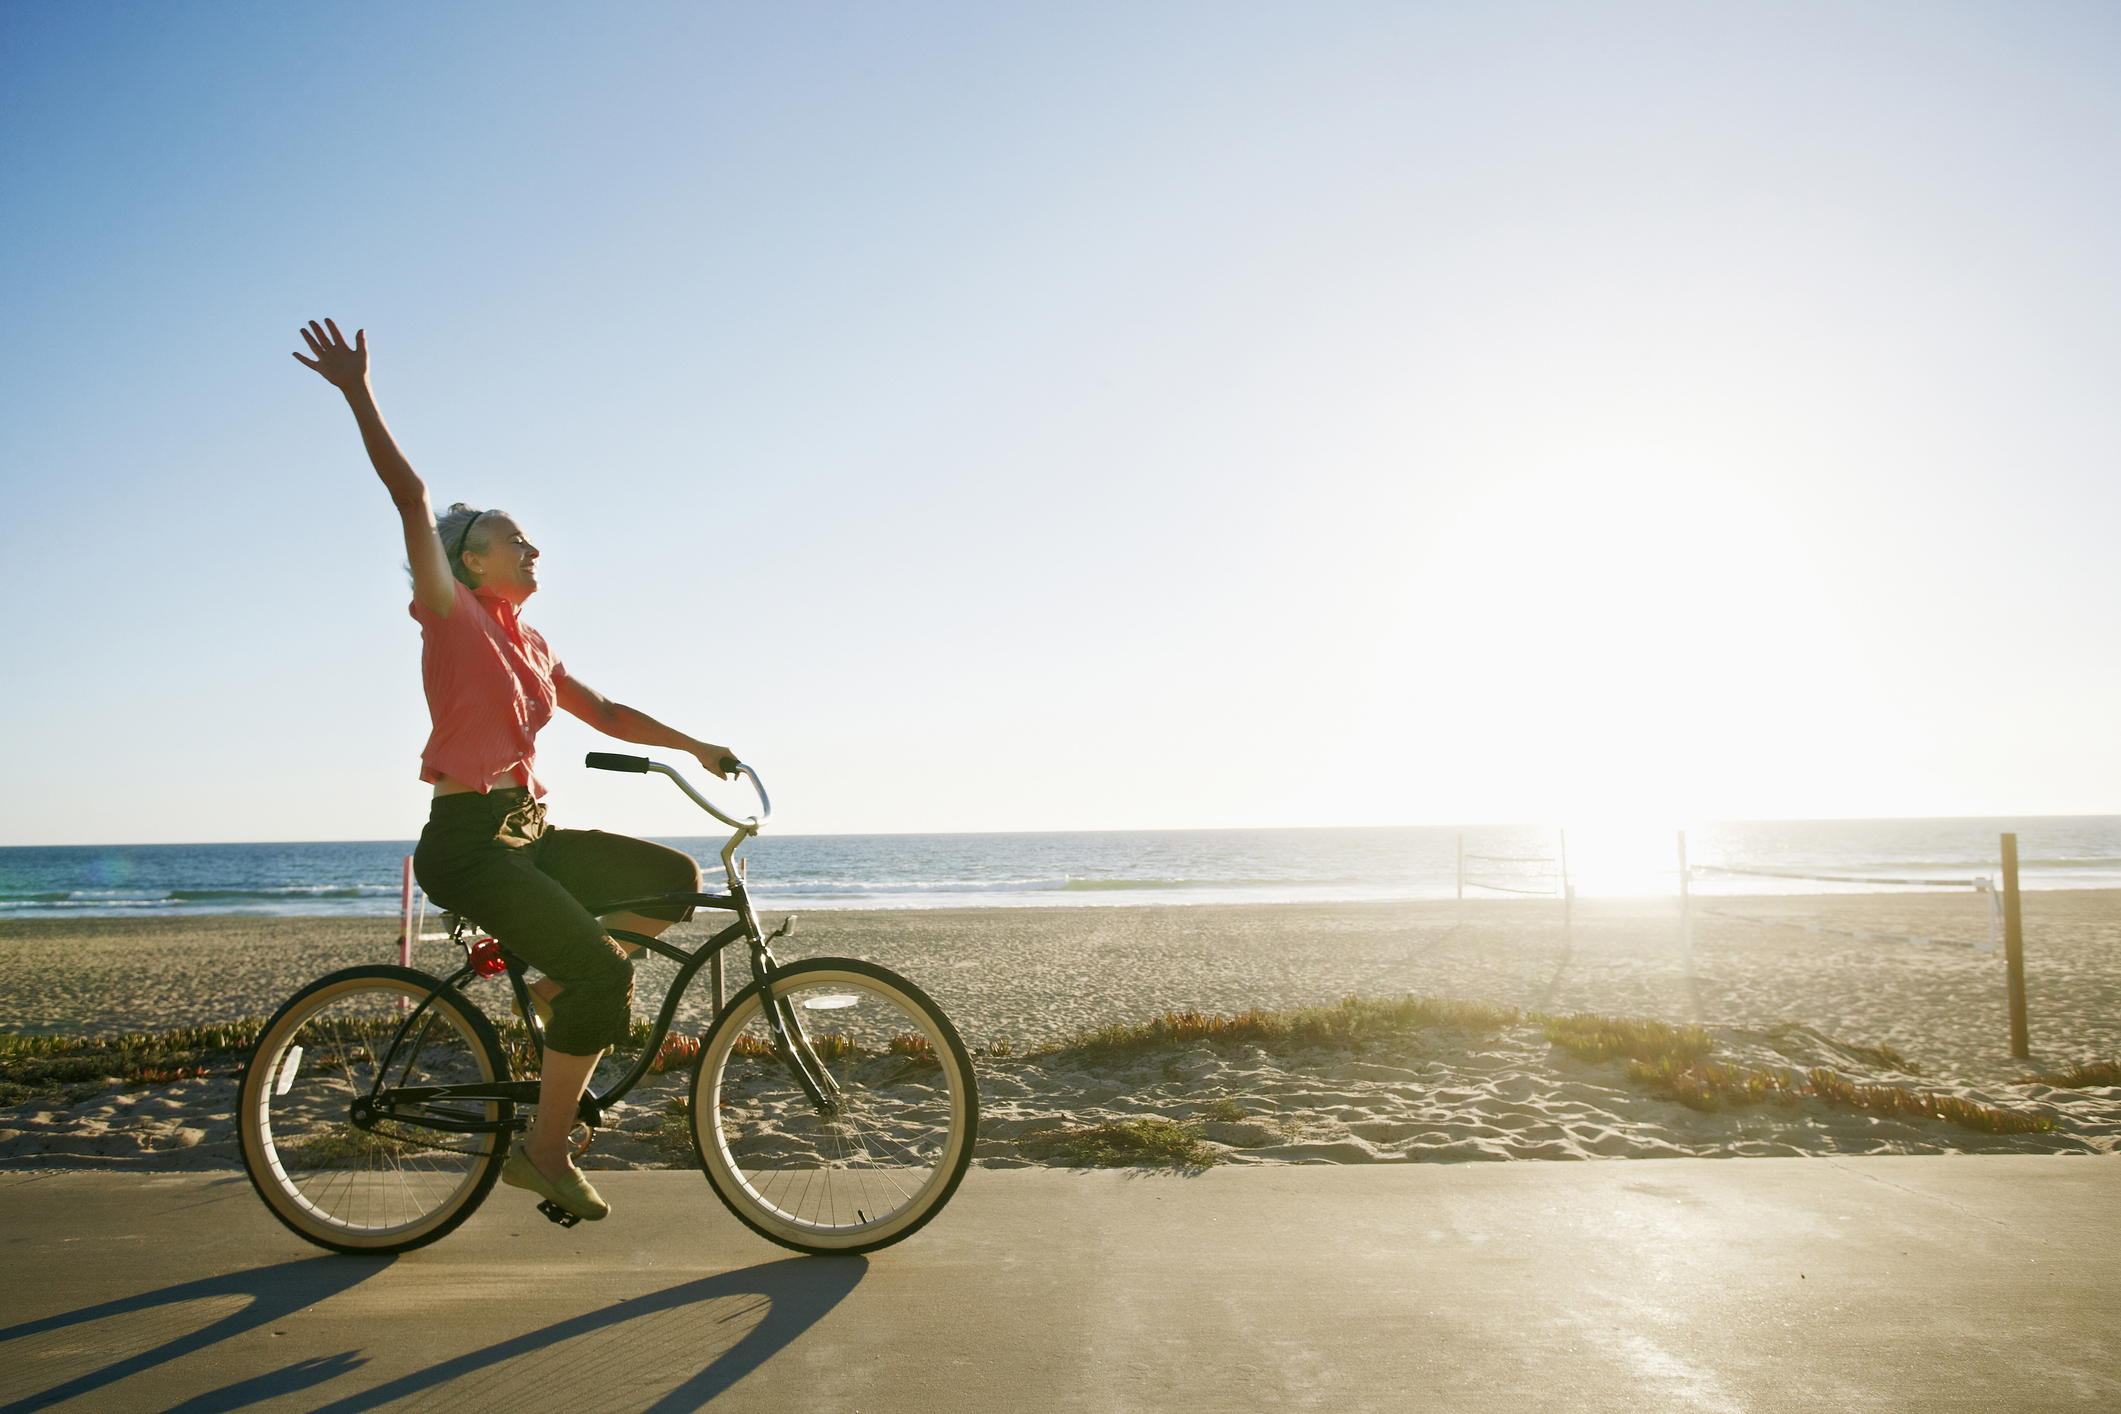 Person riding a bicycle along a beach, one arm raised in joy as the sun sets on the horizon